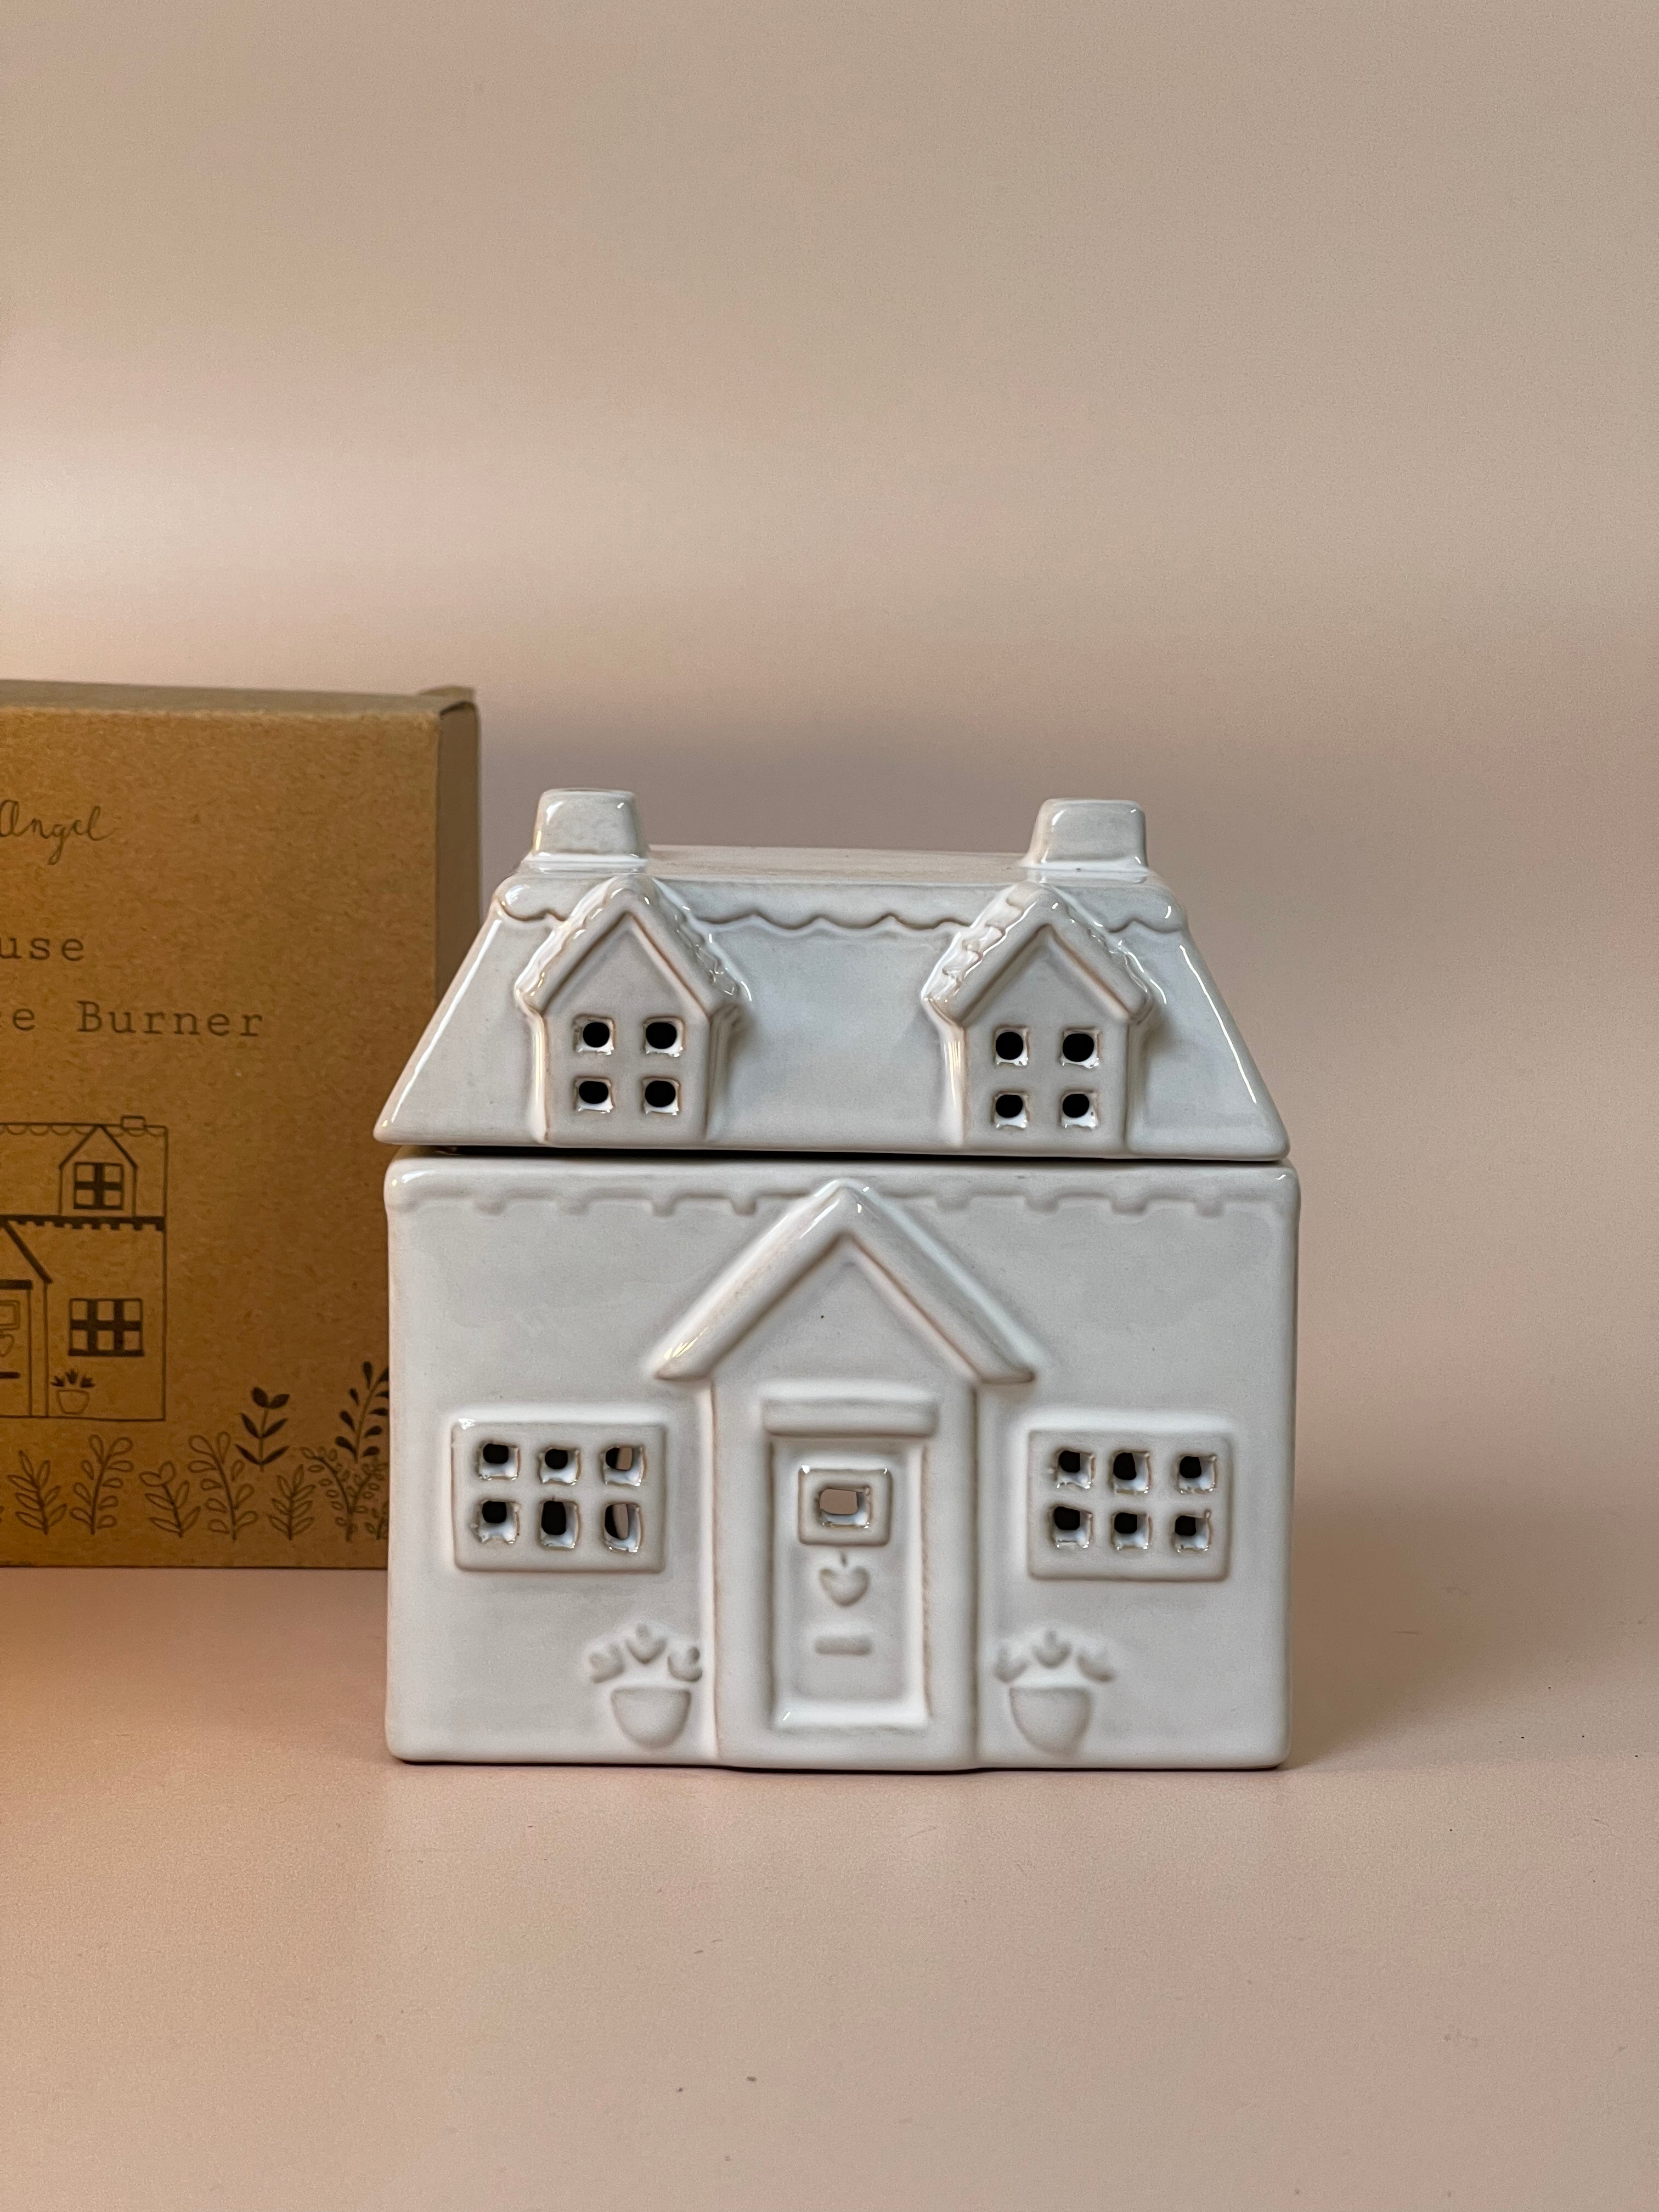 House-shaped wax melt burner with intricate detailing, designed to melt wax melts and fill your home with delightful fragrances